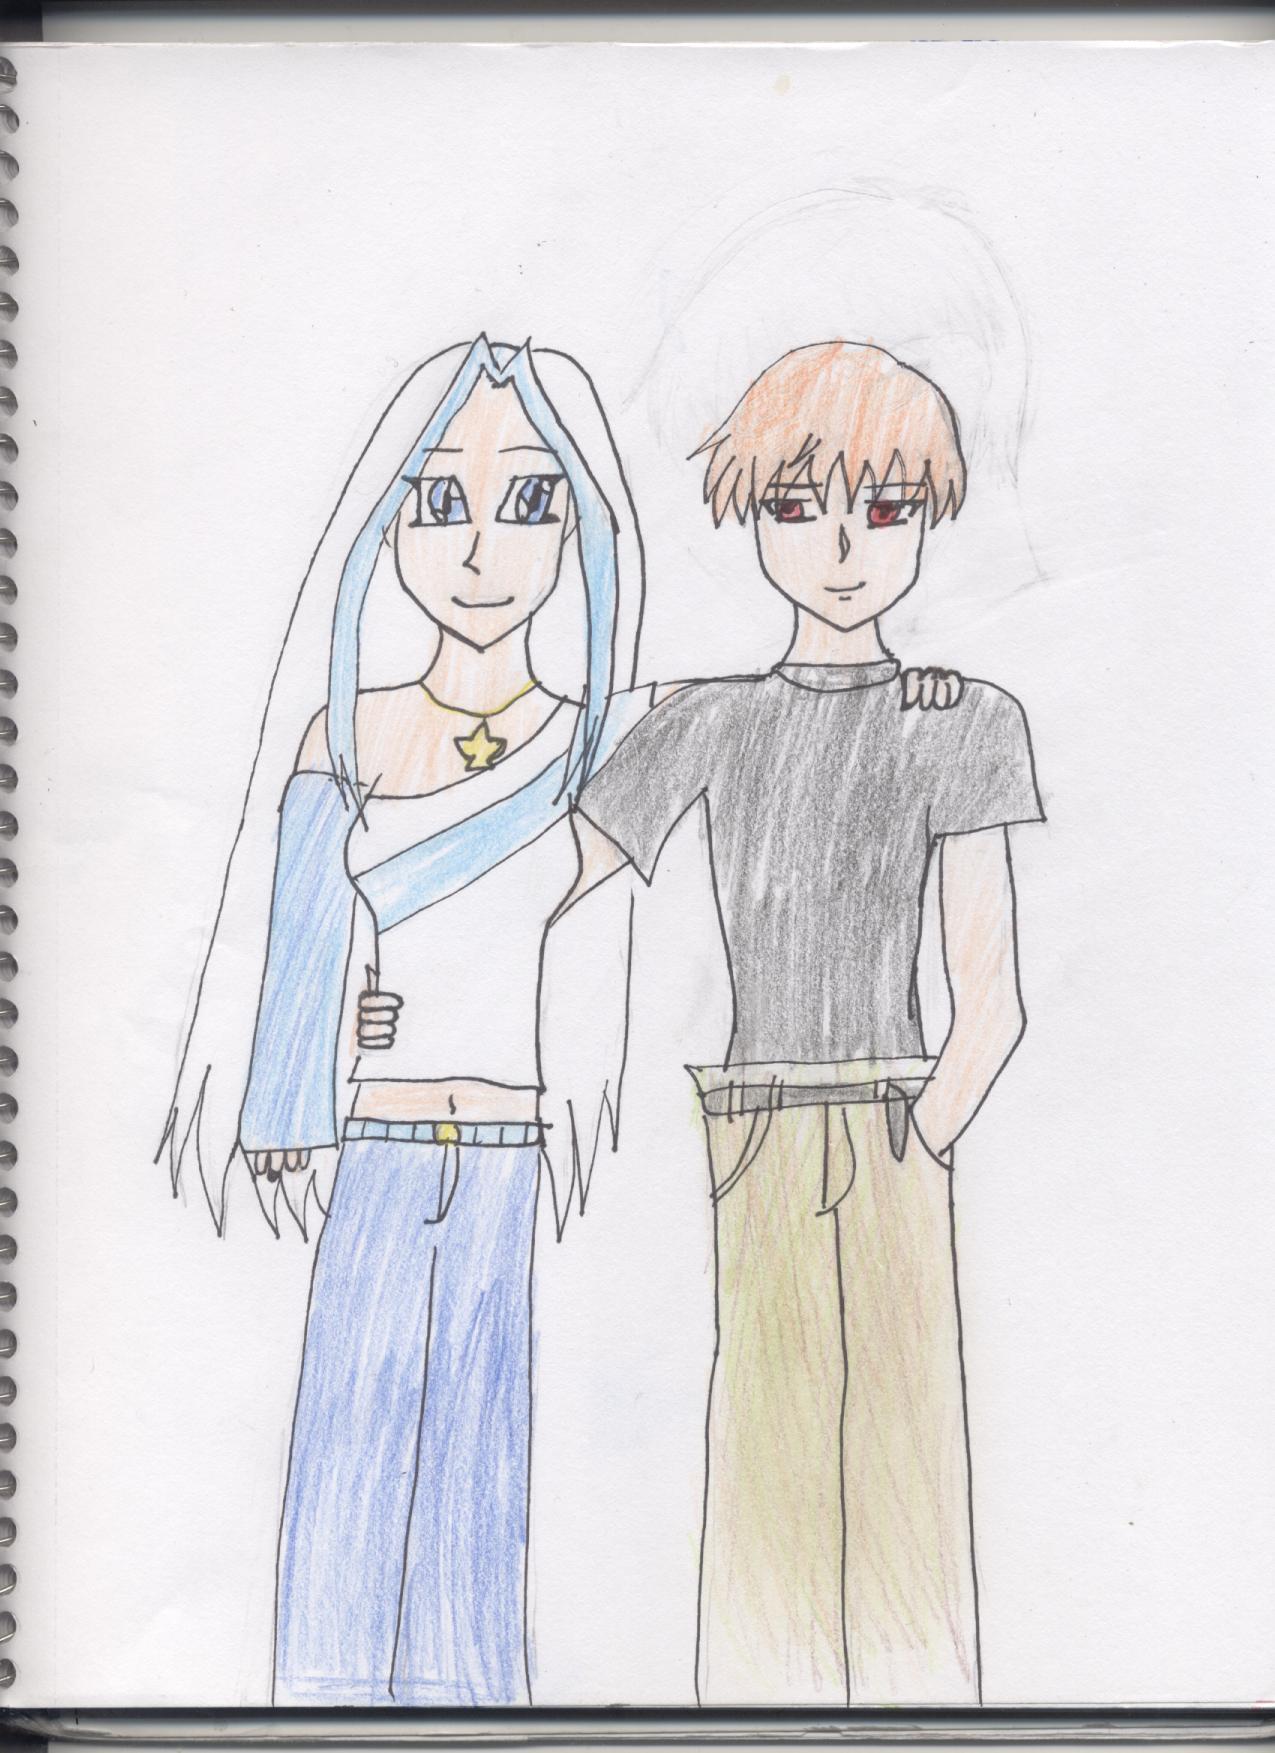 Request for art_angel_52: Kyo and Cirri by anime132005333